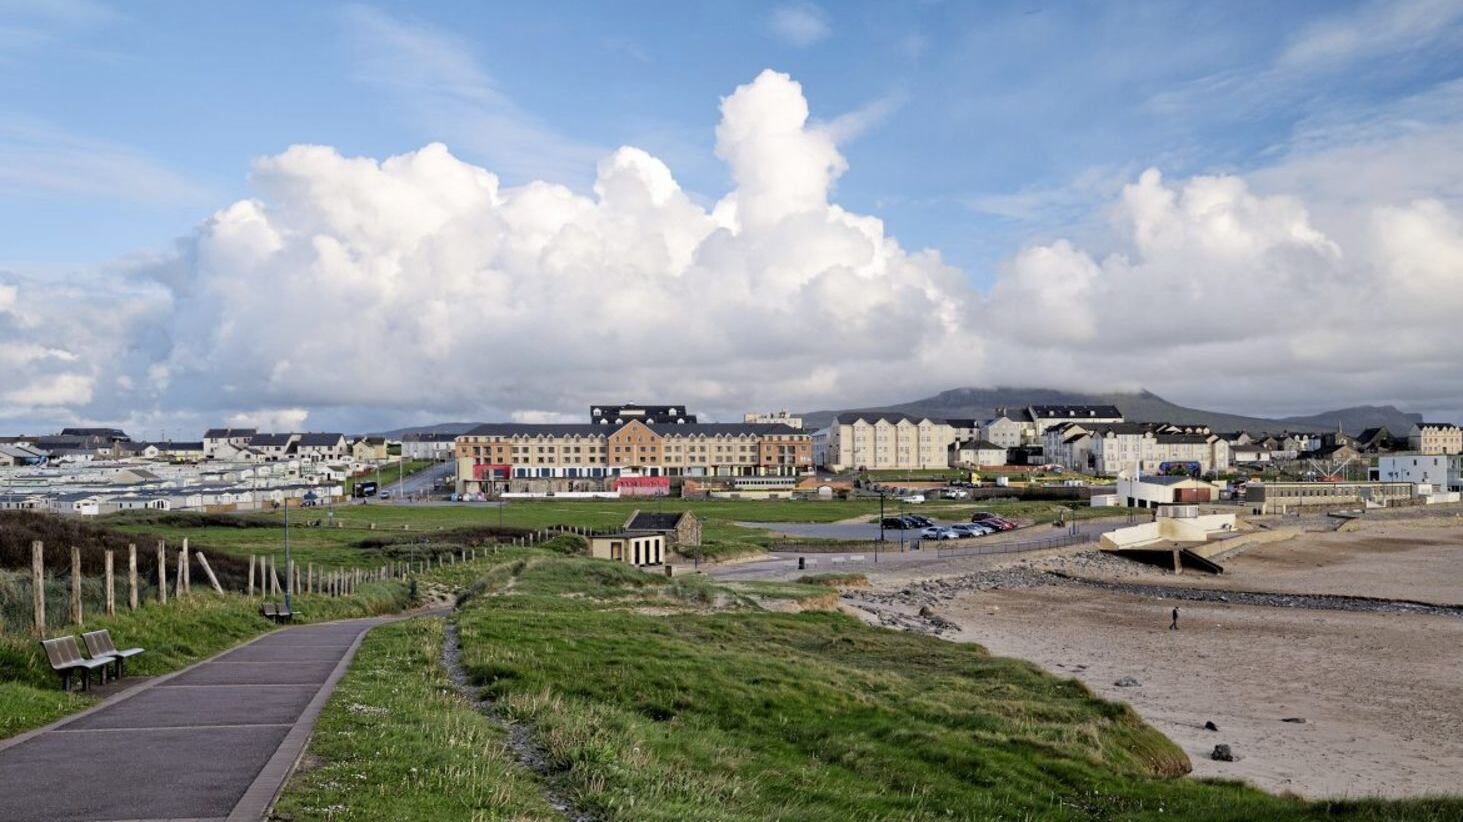 The seaside town of Bundoran, Co Donegal, is well known to many northern holidaymakers and has some great restaurants if you know where to look